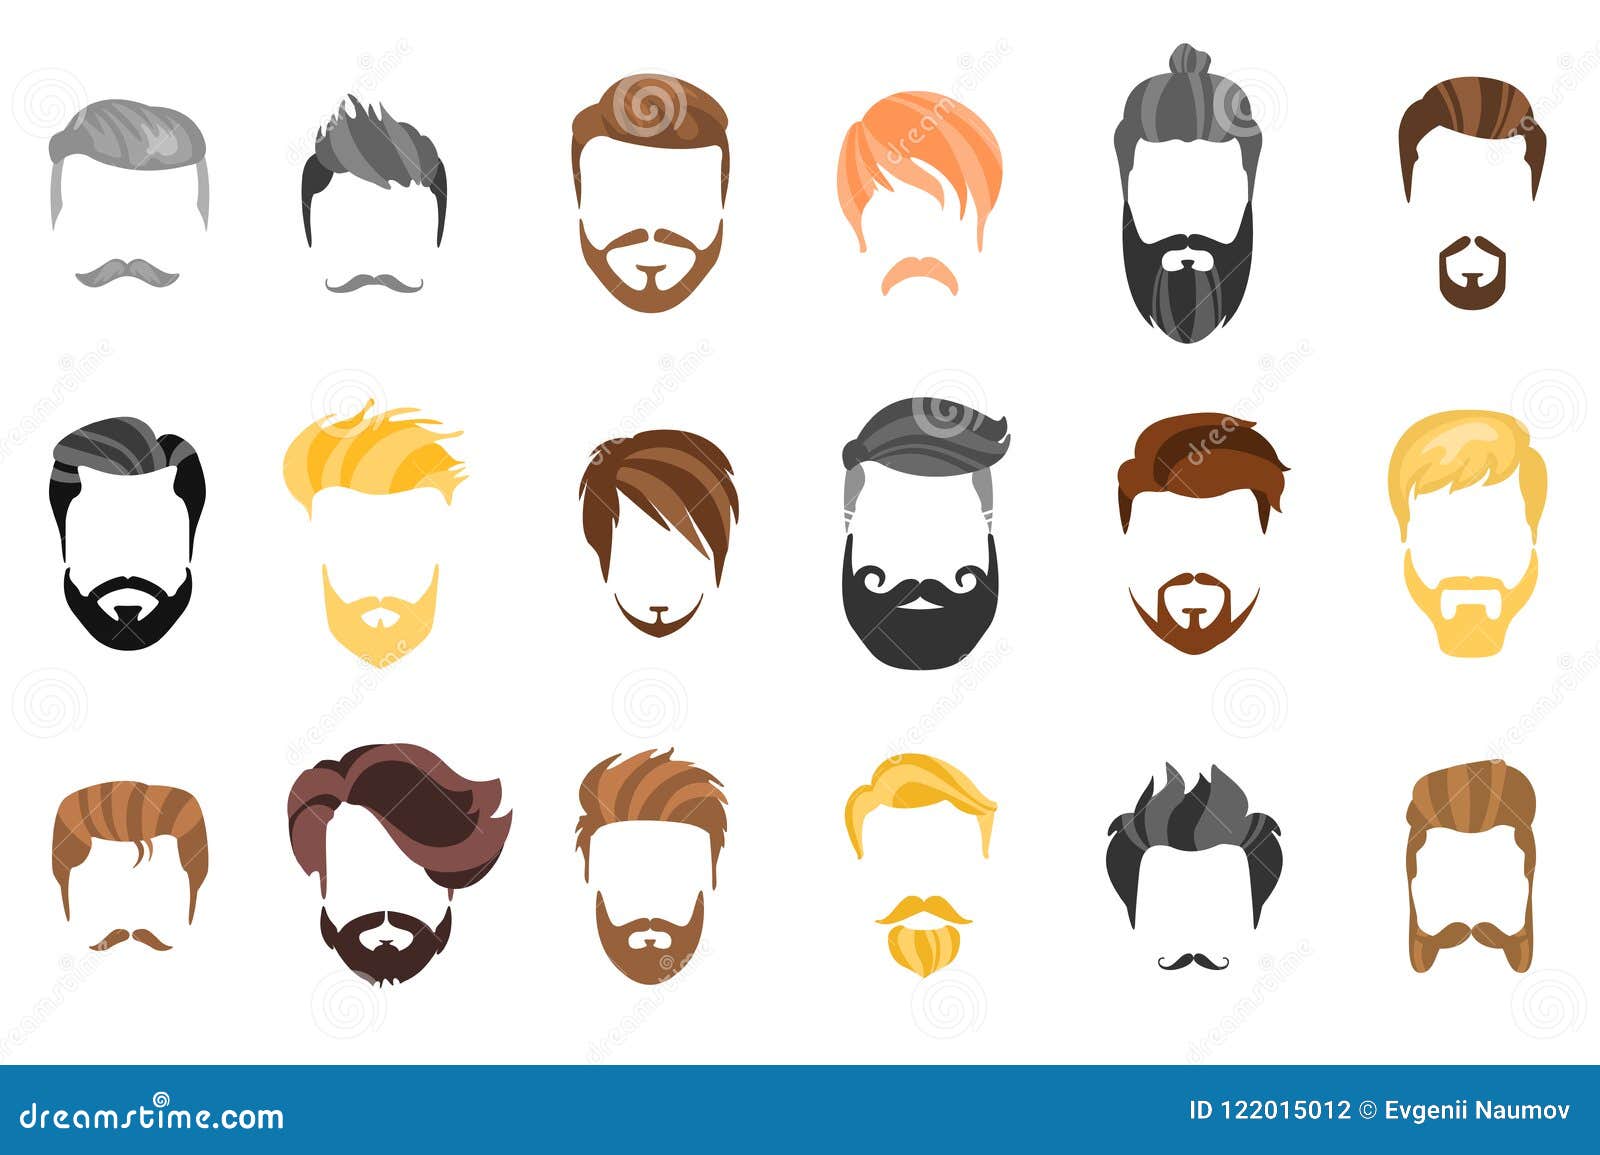 10 Best Beard and Hair Style Combinations for Men - wide 2